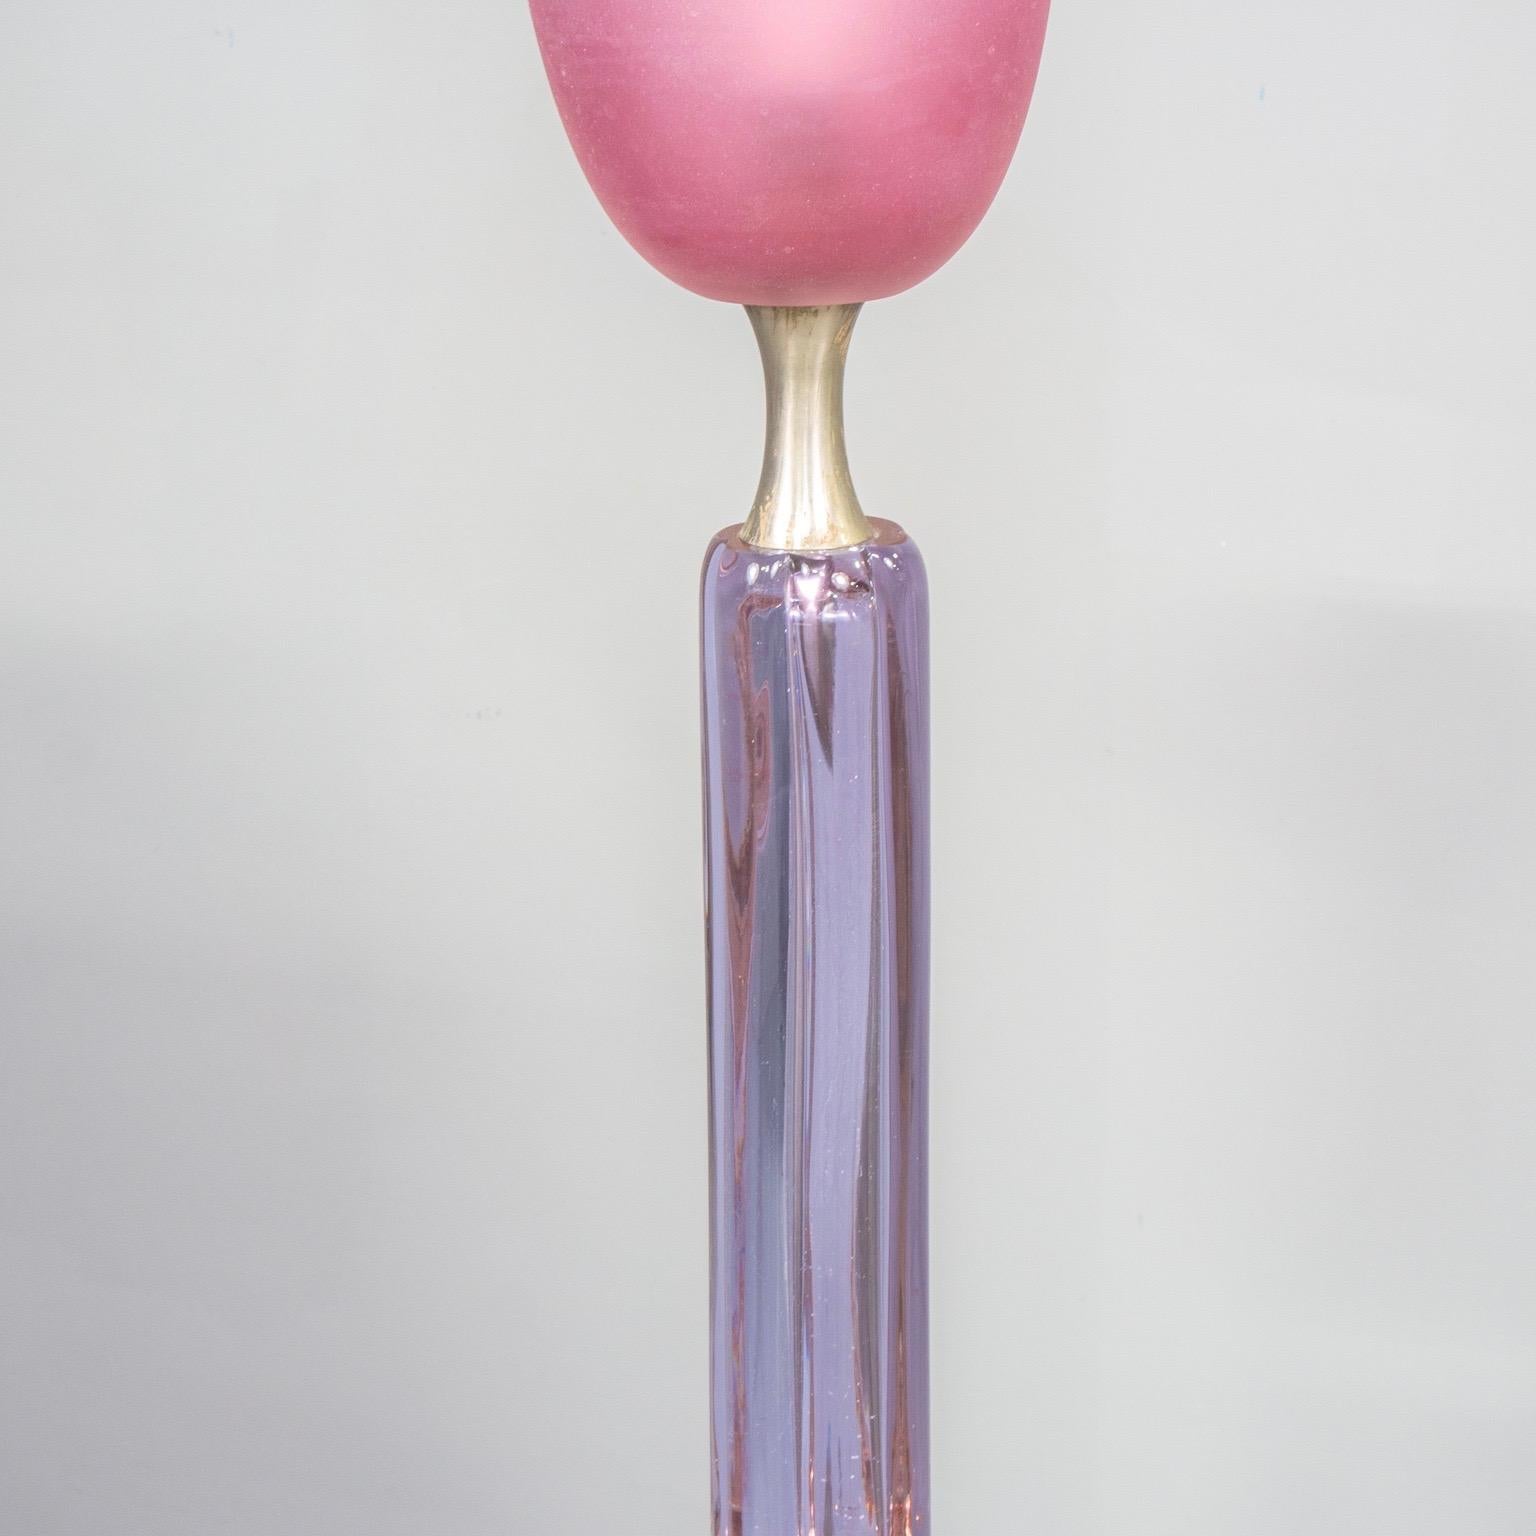 Art Deco Murano Glass Amethyst and Pink Glass Floor Lamp Attributed to Venini